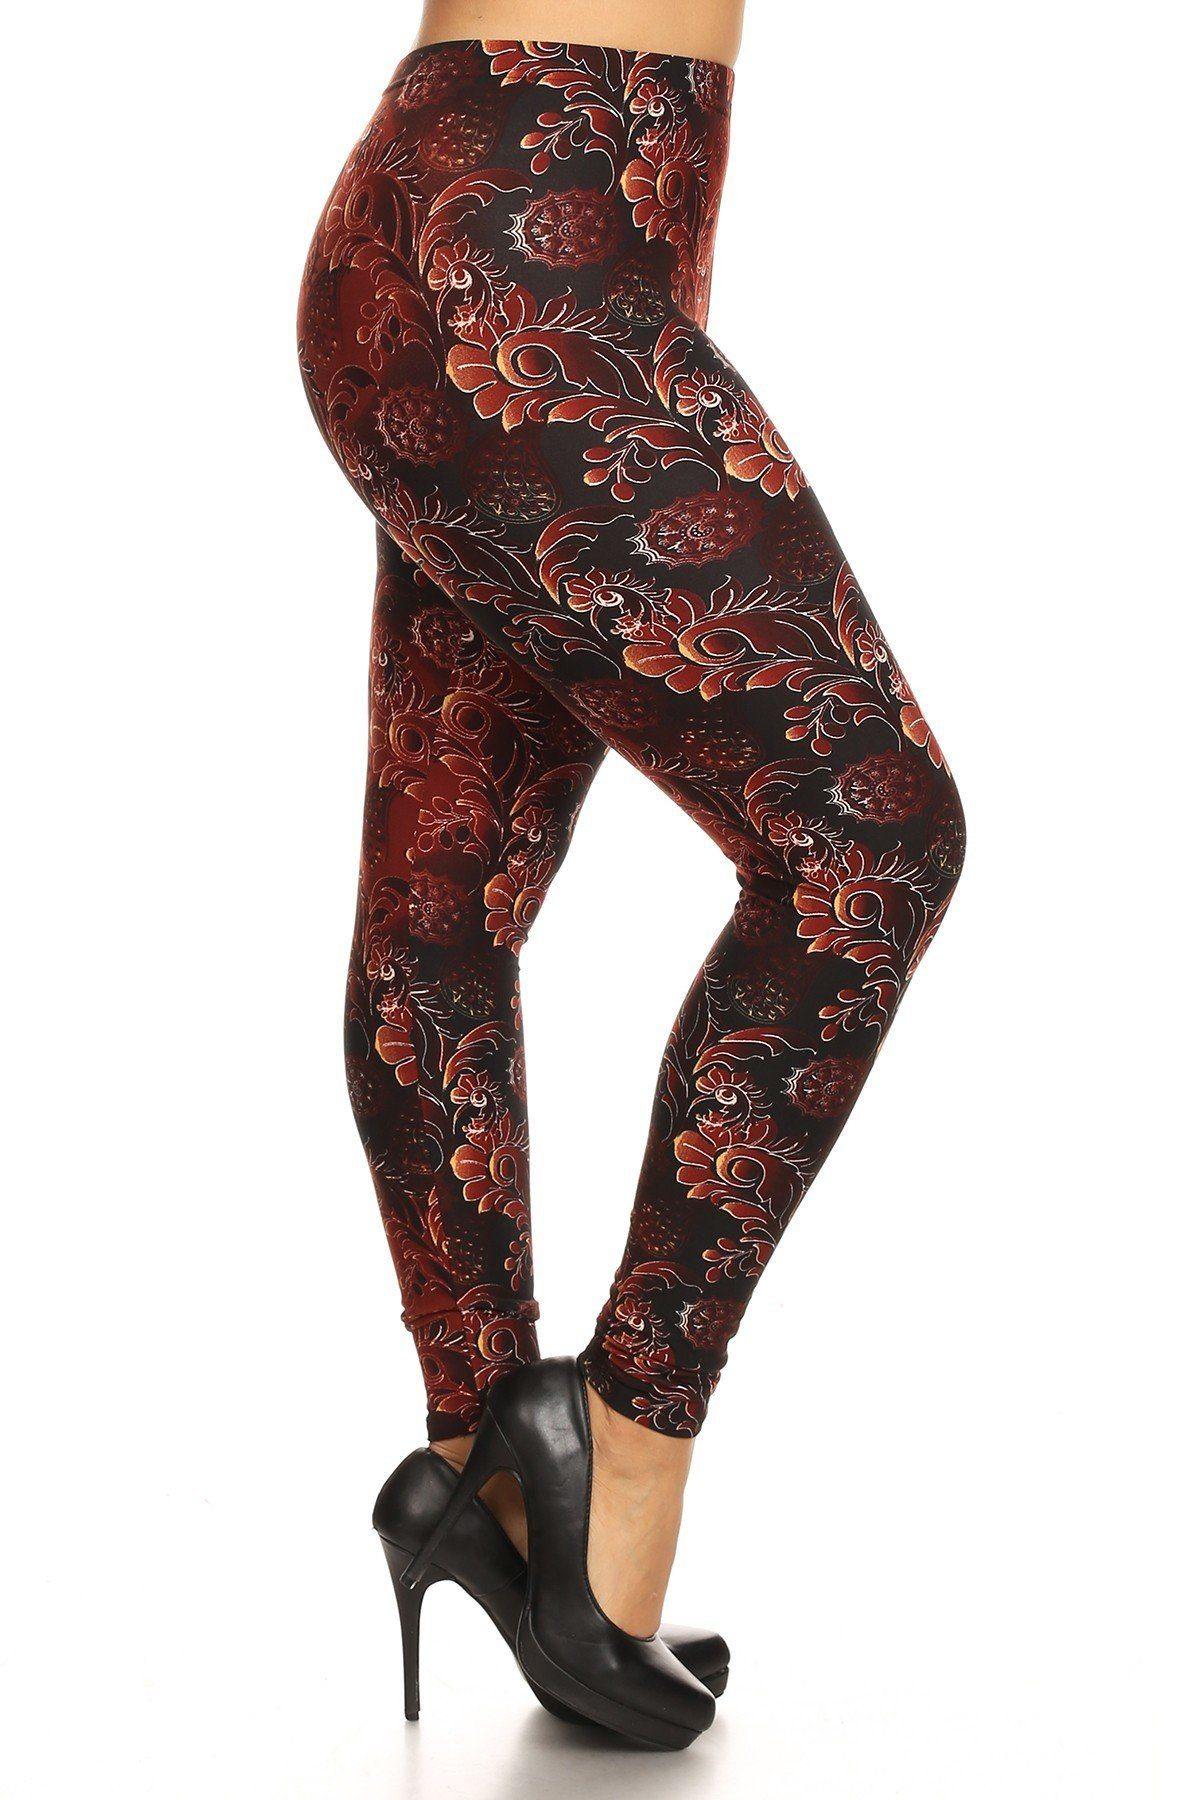 Plus Size Abstract Print, Full Length Leggings In A Slim Fitting Style With A Banded High Waist. - Pearlara